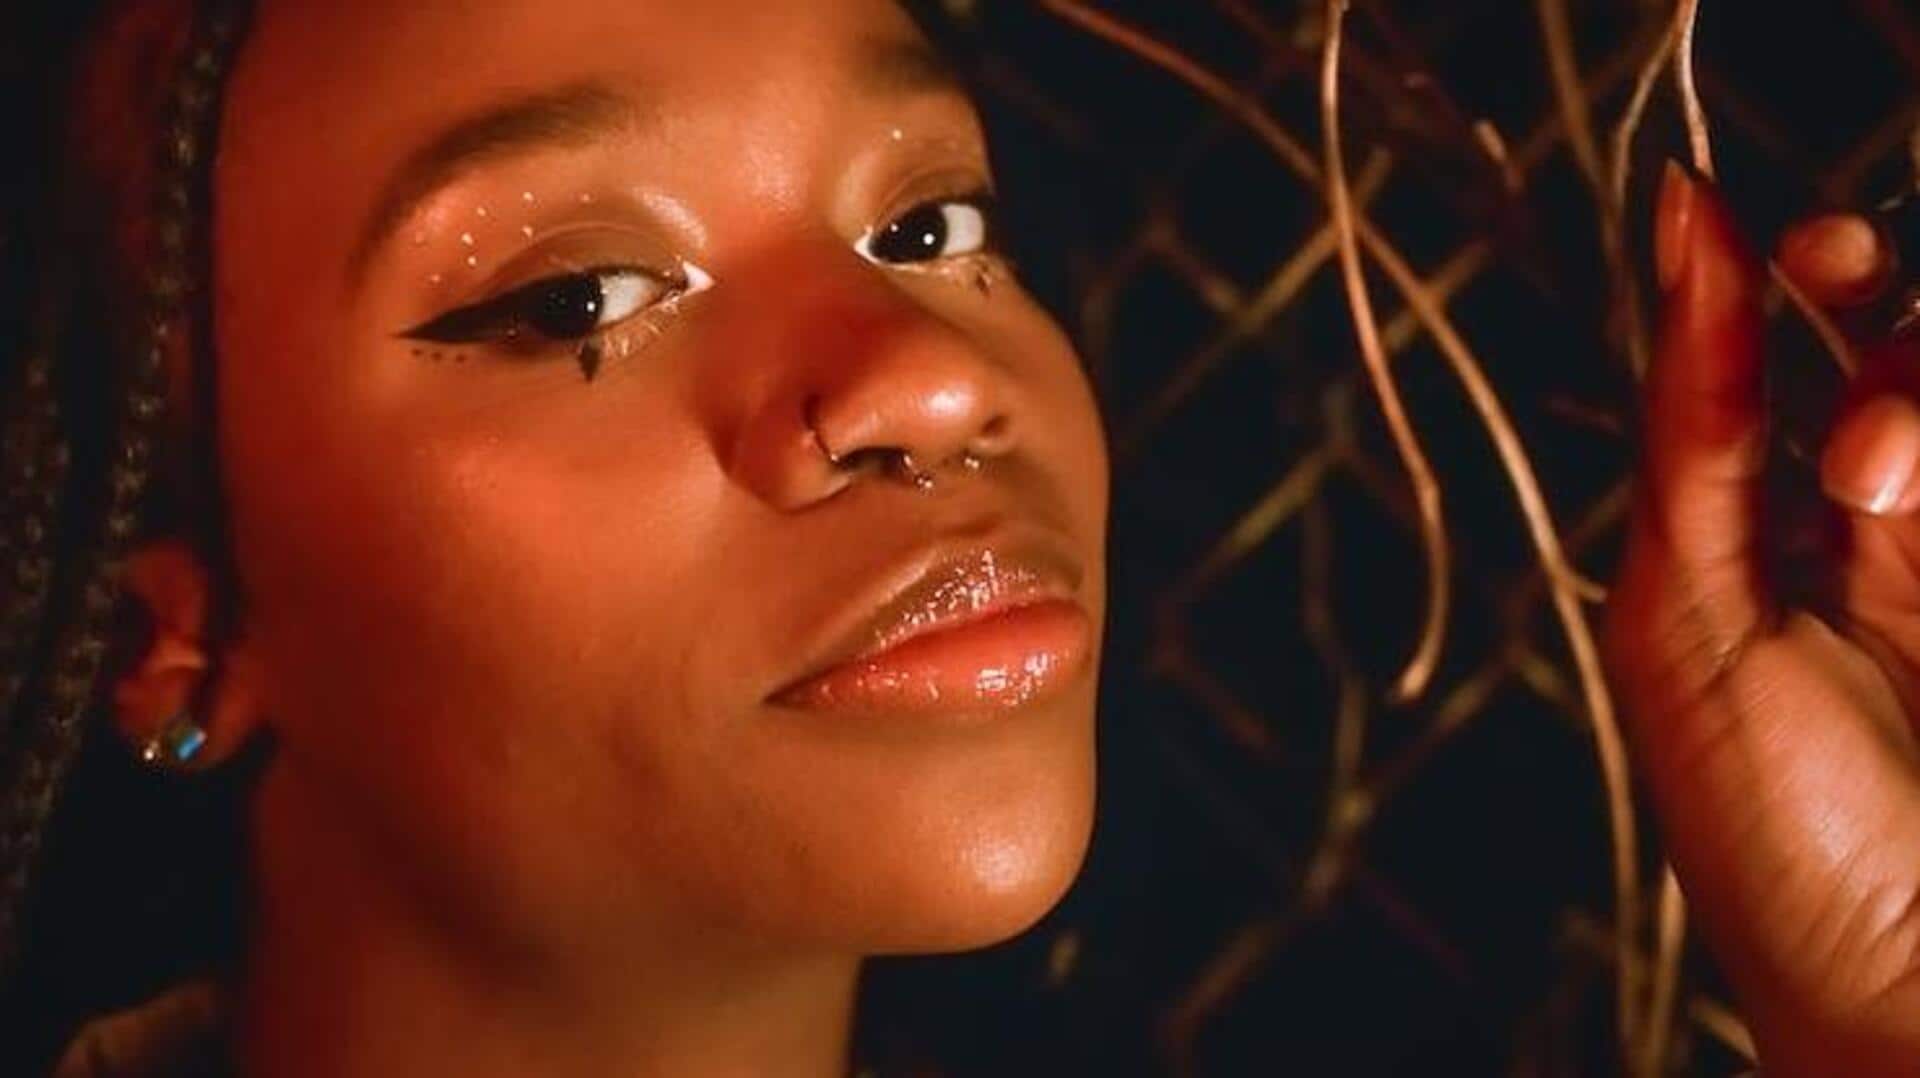 Glossy goodness: Unveiling the 'honey lips' makeup trend